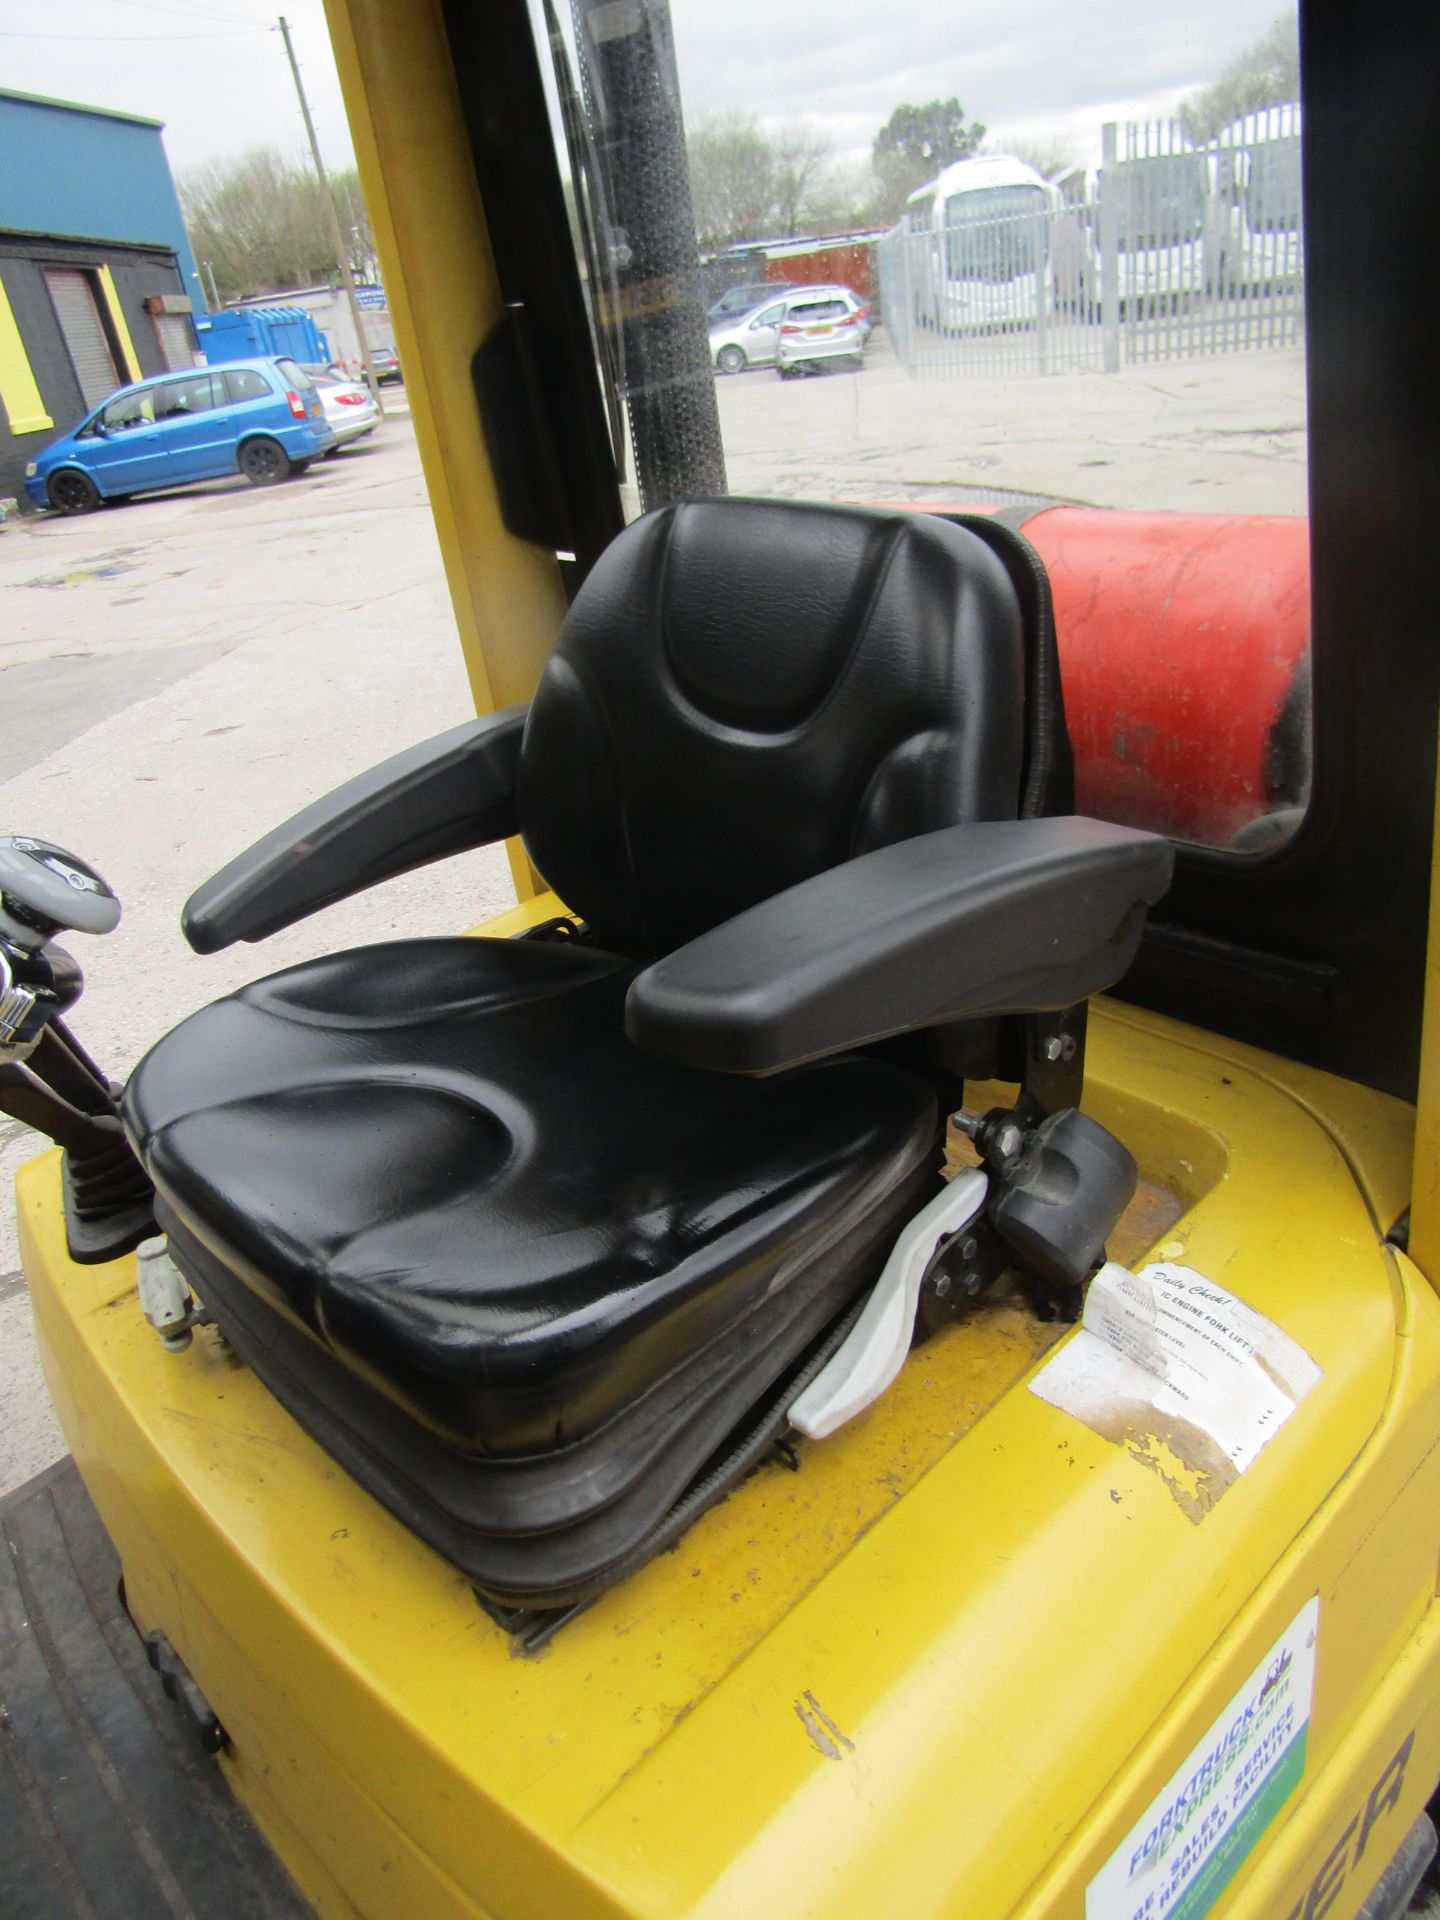 Hyster H2.00Xm Forklift Truck 7235 hours currently manufactured in 2004, has a roof as well as front - Bild 3 aus 12